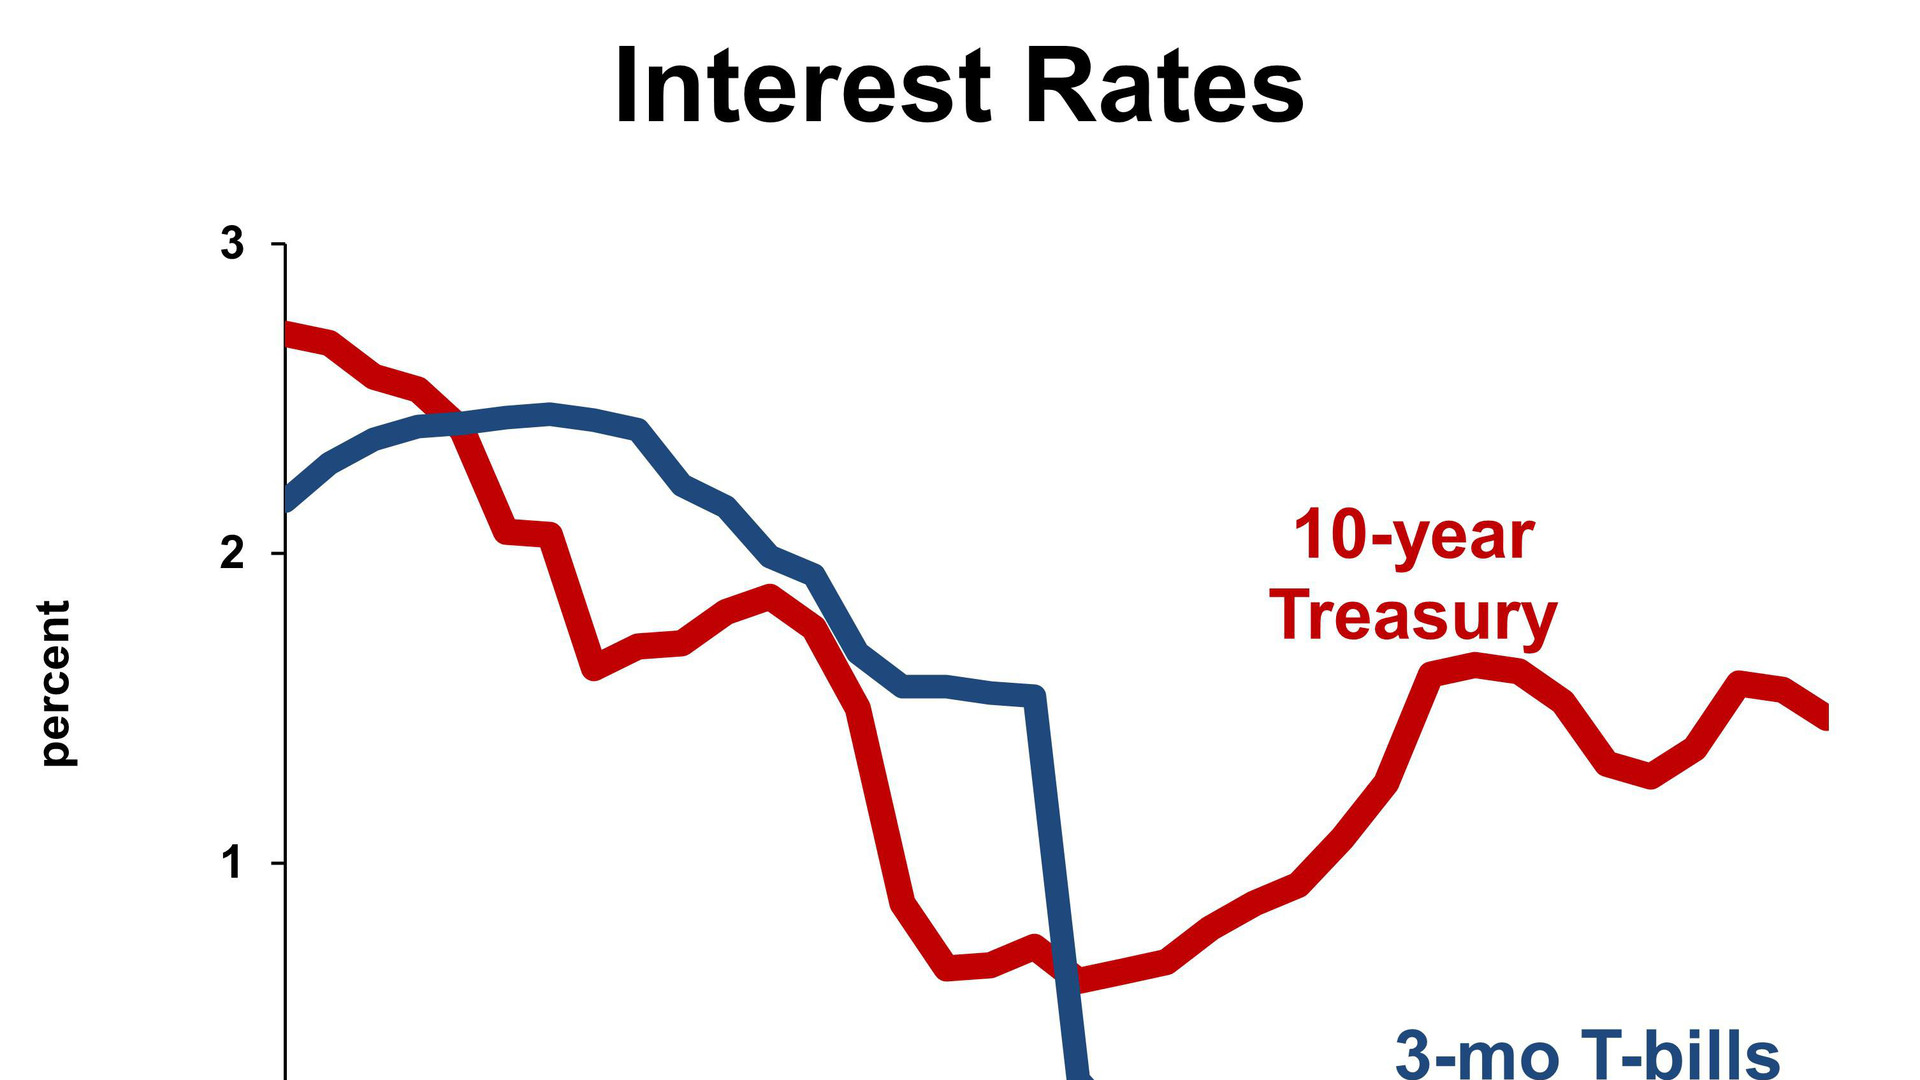 What Rising Interest Rates Mean For Business